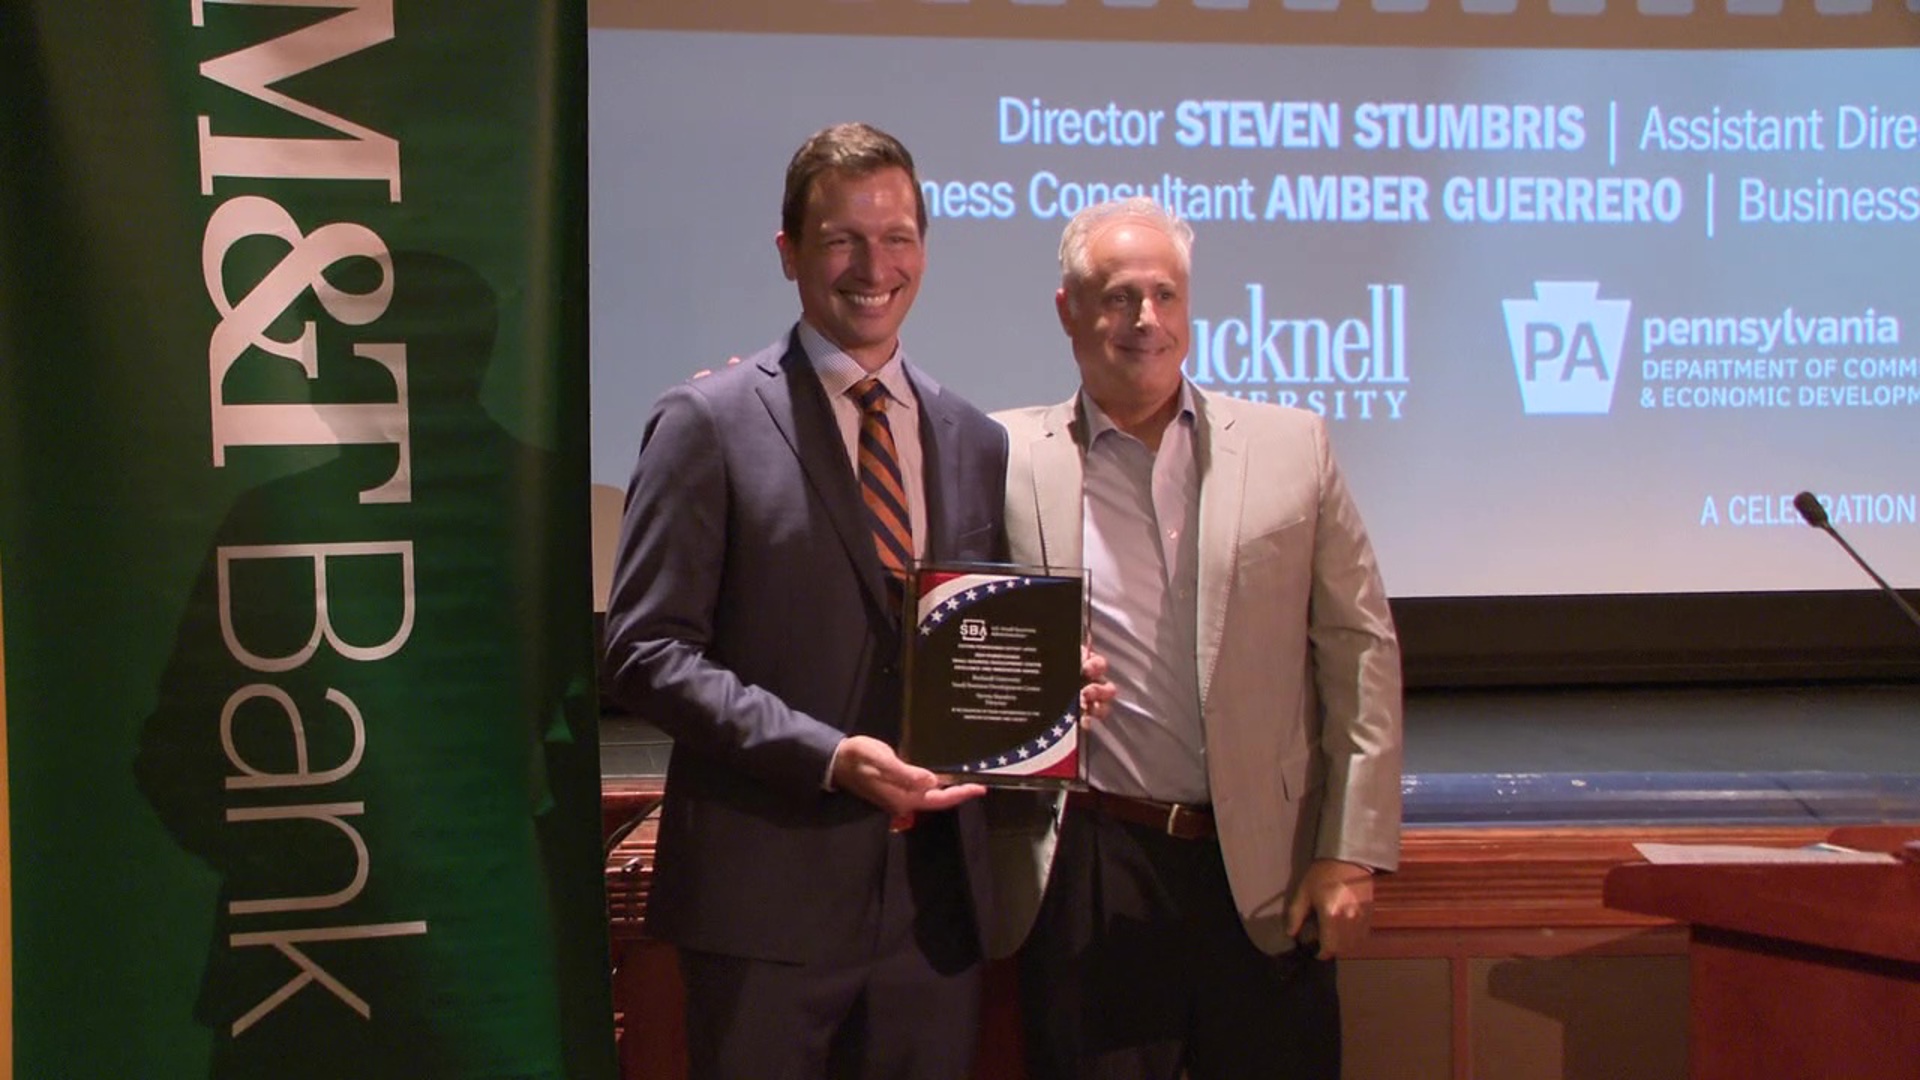 It's National Small Business Week, and Bucknell University's Small Business Development Center is being honored.